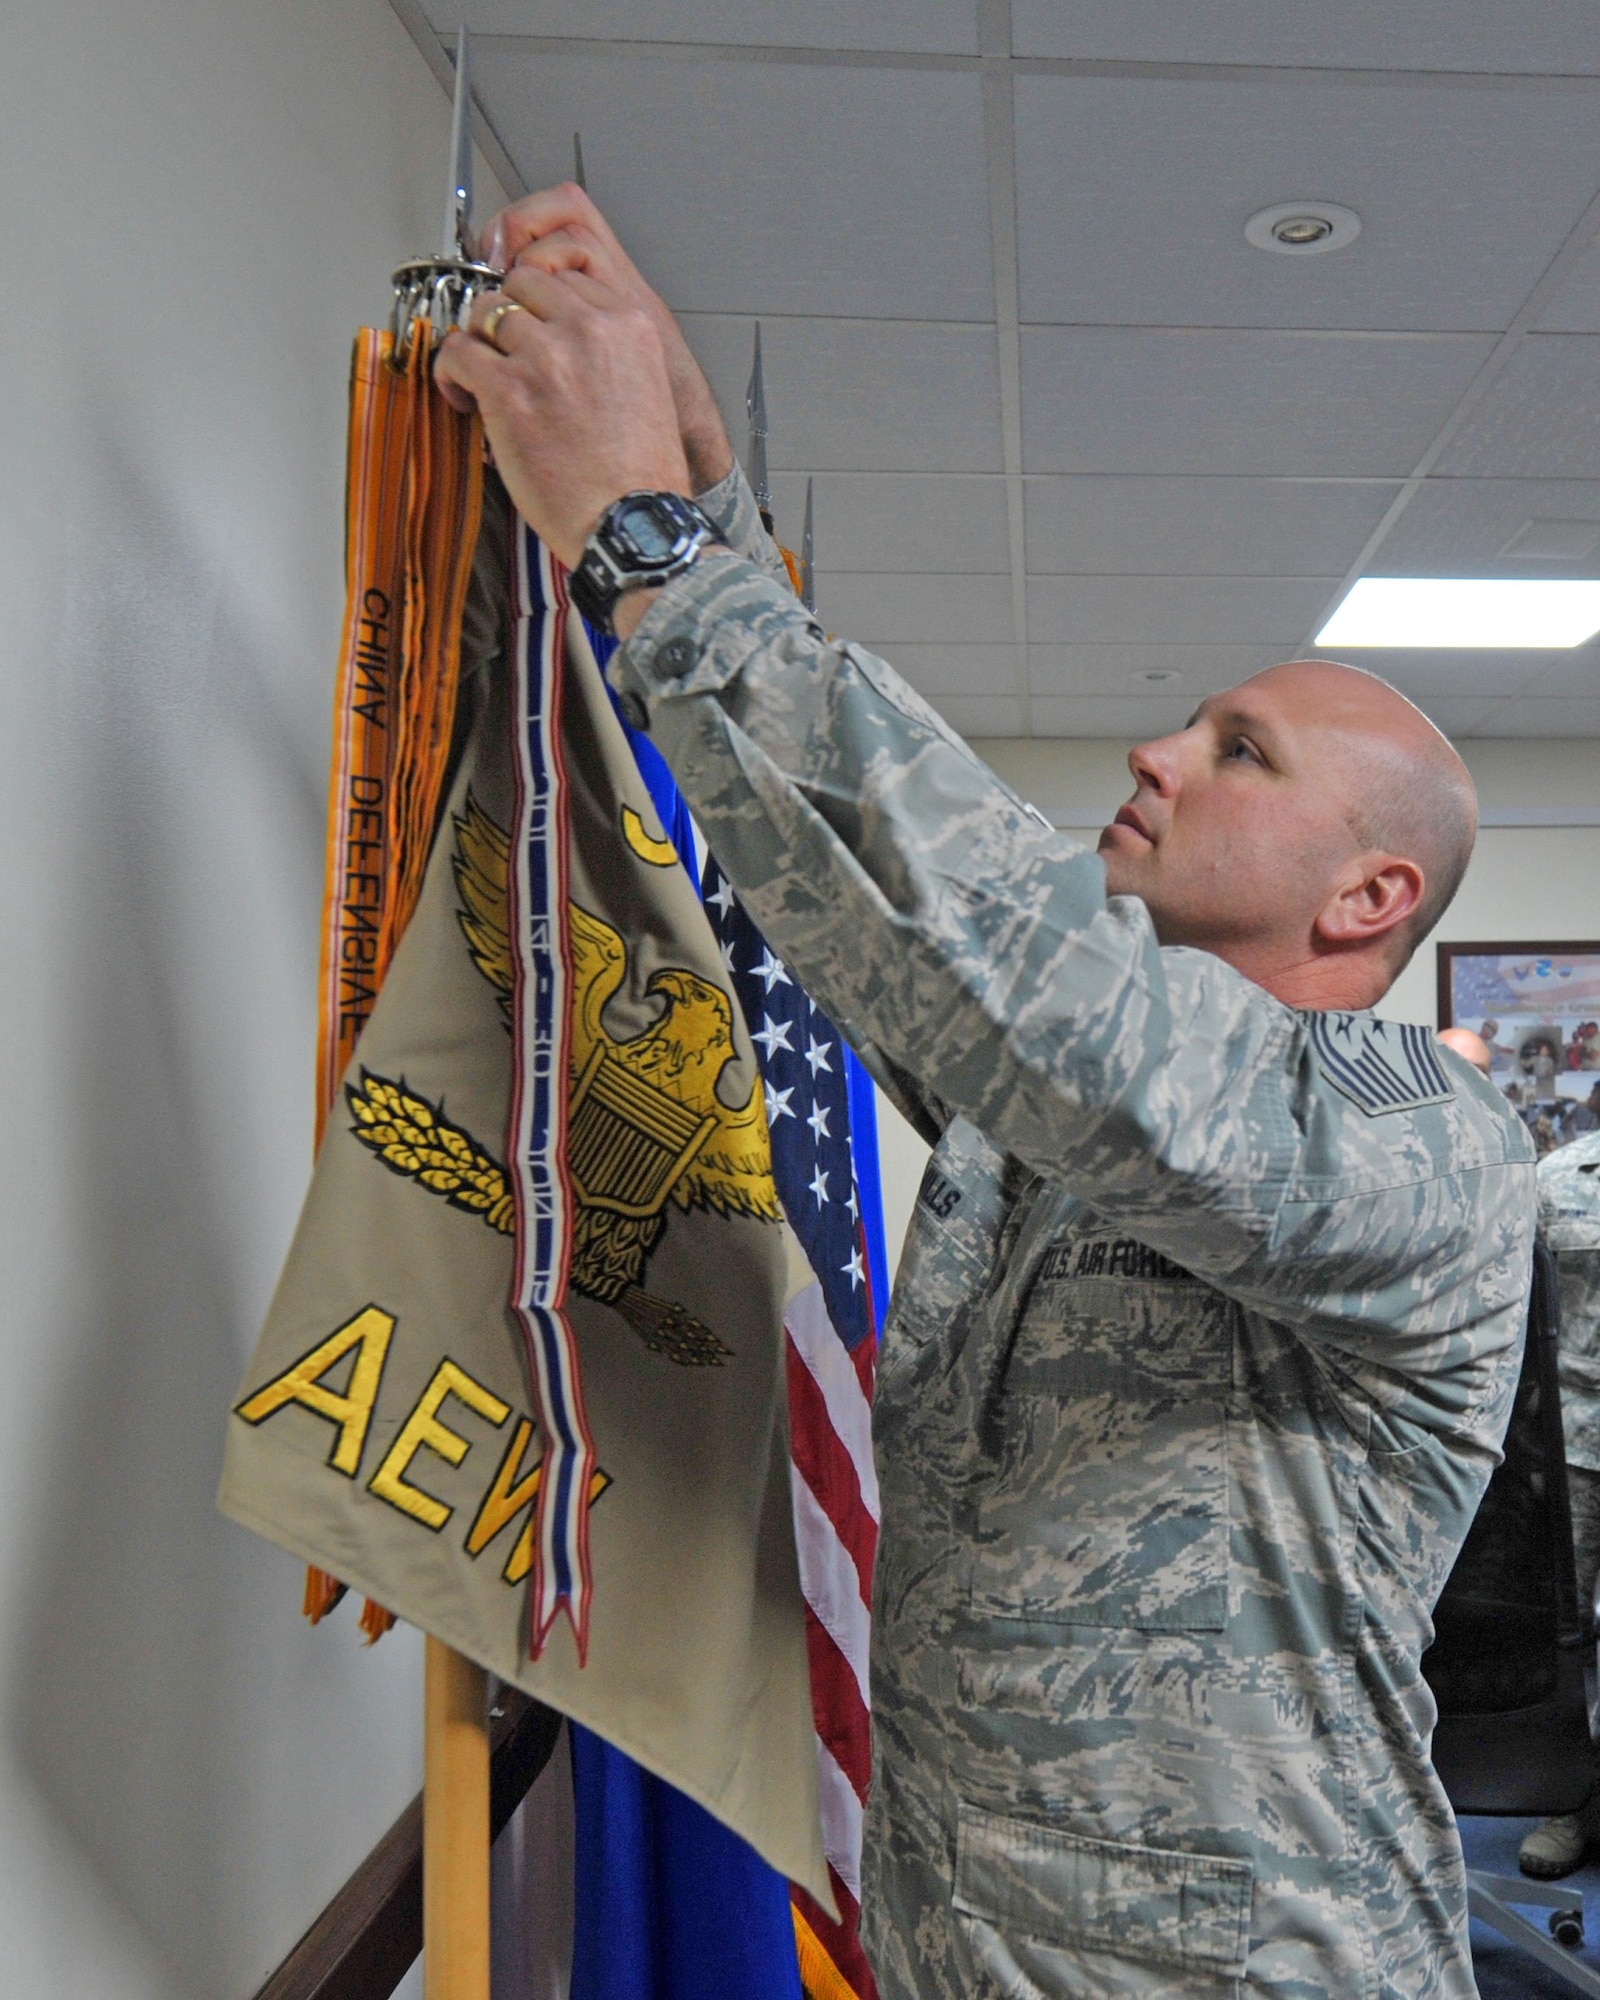 Chief Master Sgt. Charles Mills, 380th Air Expeditionary Wing command chief, places a streamer on the 380th’s guidon in recognition of the unit receiving the Meritorious Unit Award during a ceremony at an undisclosed location in Southwest Asia, Jan. 18, 2016. The award recognizes the contributions of the team deployed here from July 2014 until June 2015, during which 380 AEW Airmen flew more than 13,200 combat sorties in support of Operations Inherent Resolve, Enduring Freedom, Freedom’s Sentinel and Resolute Support. (U.S. Air Force photo by Staff Sgt. Kentavist P. Brackin/Released)